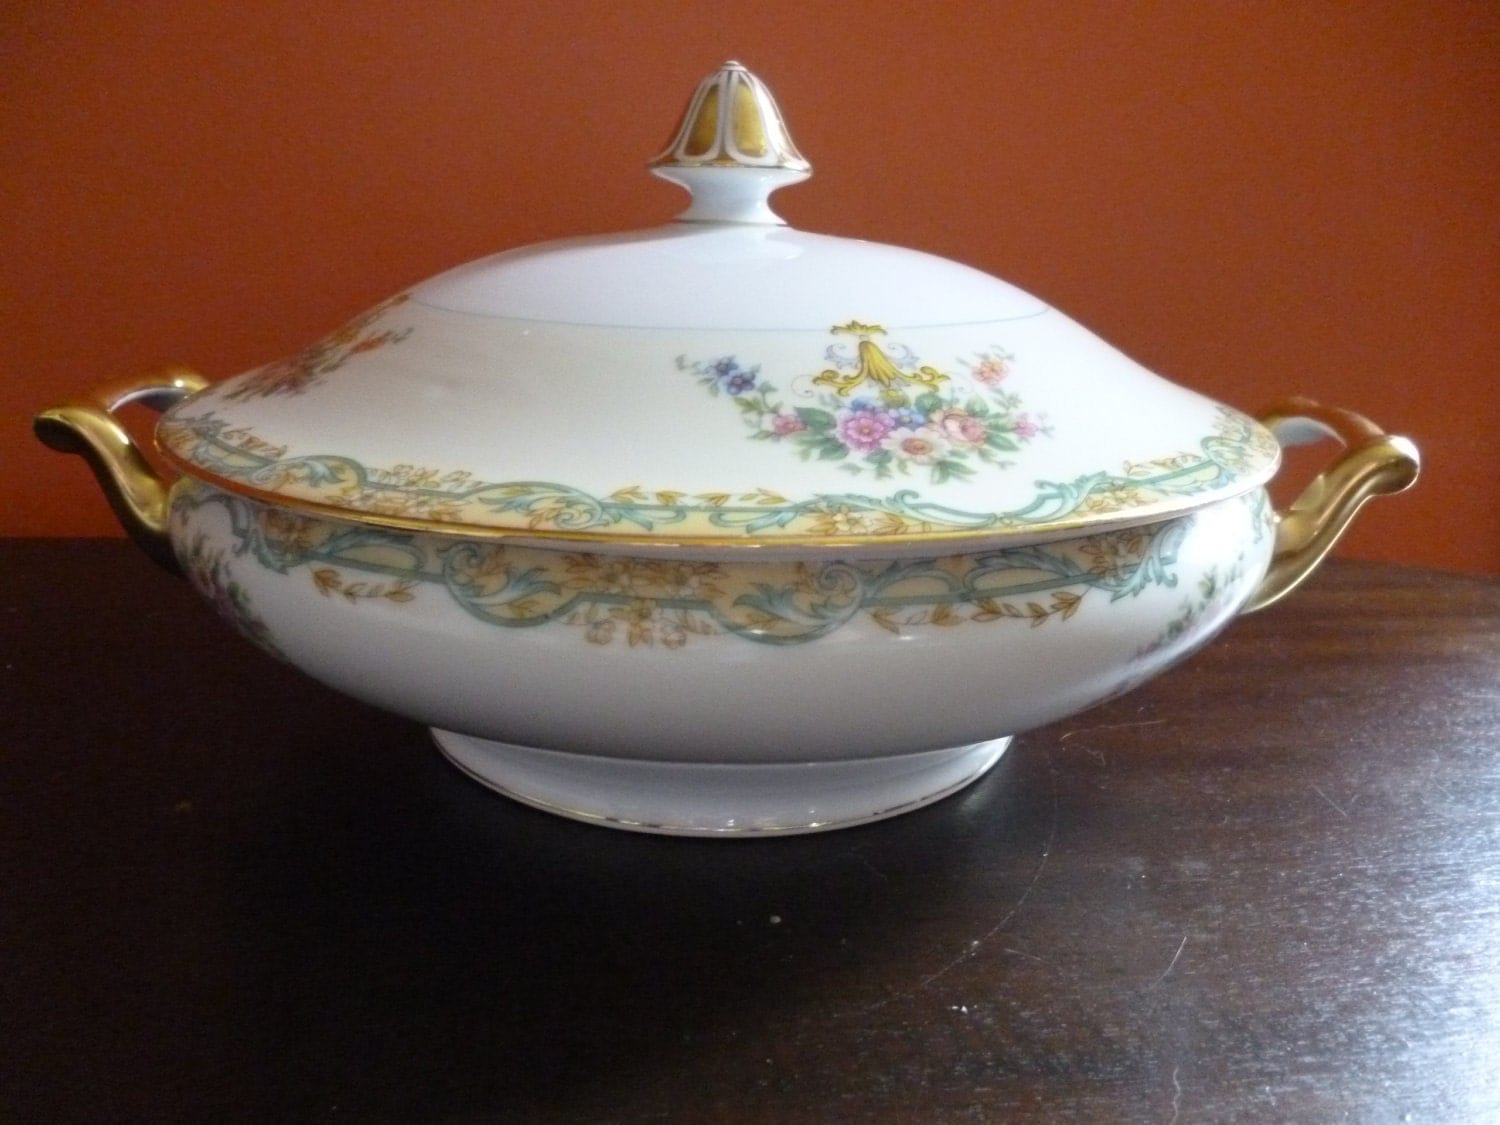 SALE Noritake Arvana Pattern Round Covered Vegetable or Soup